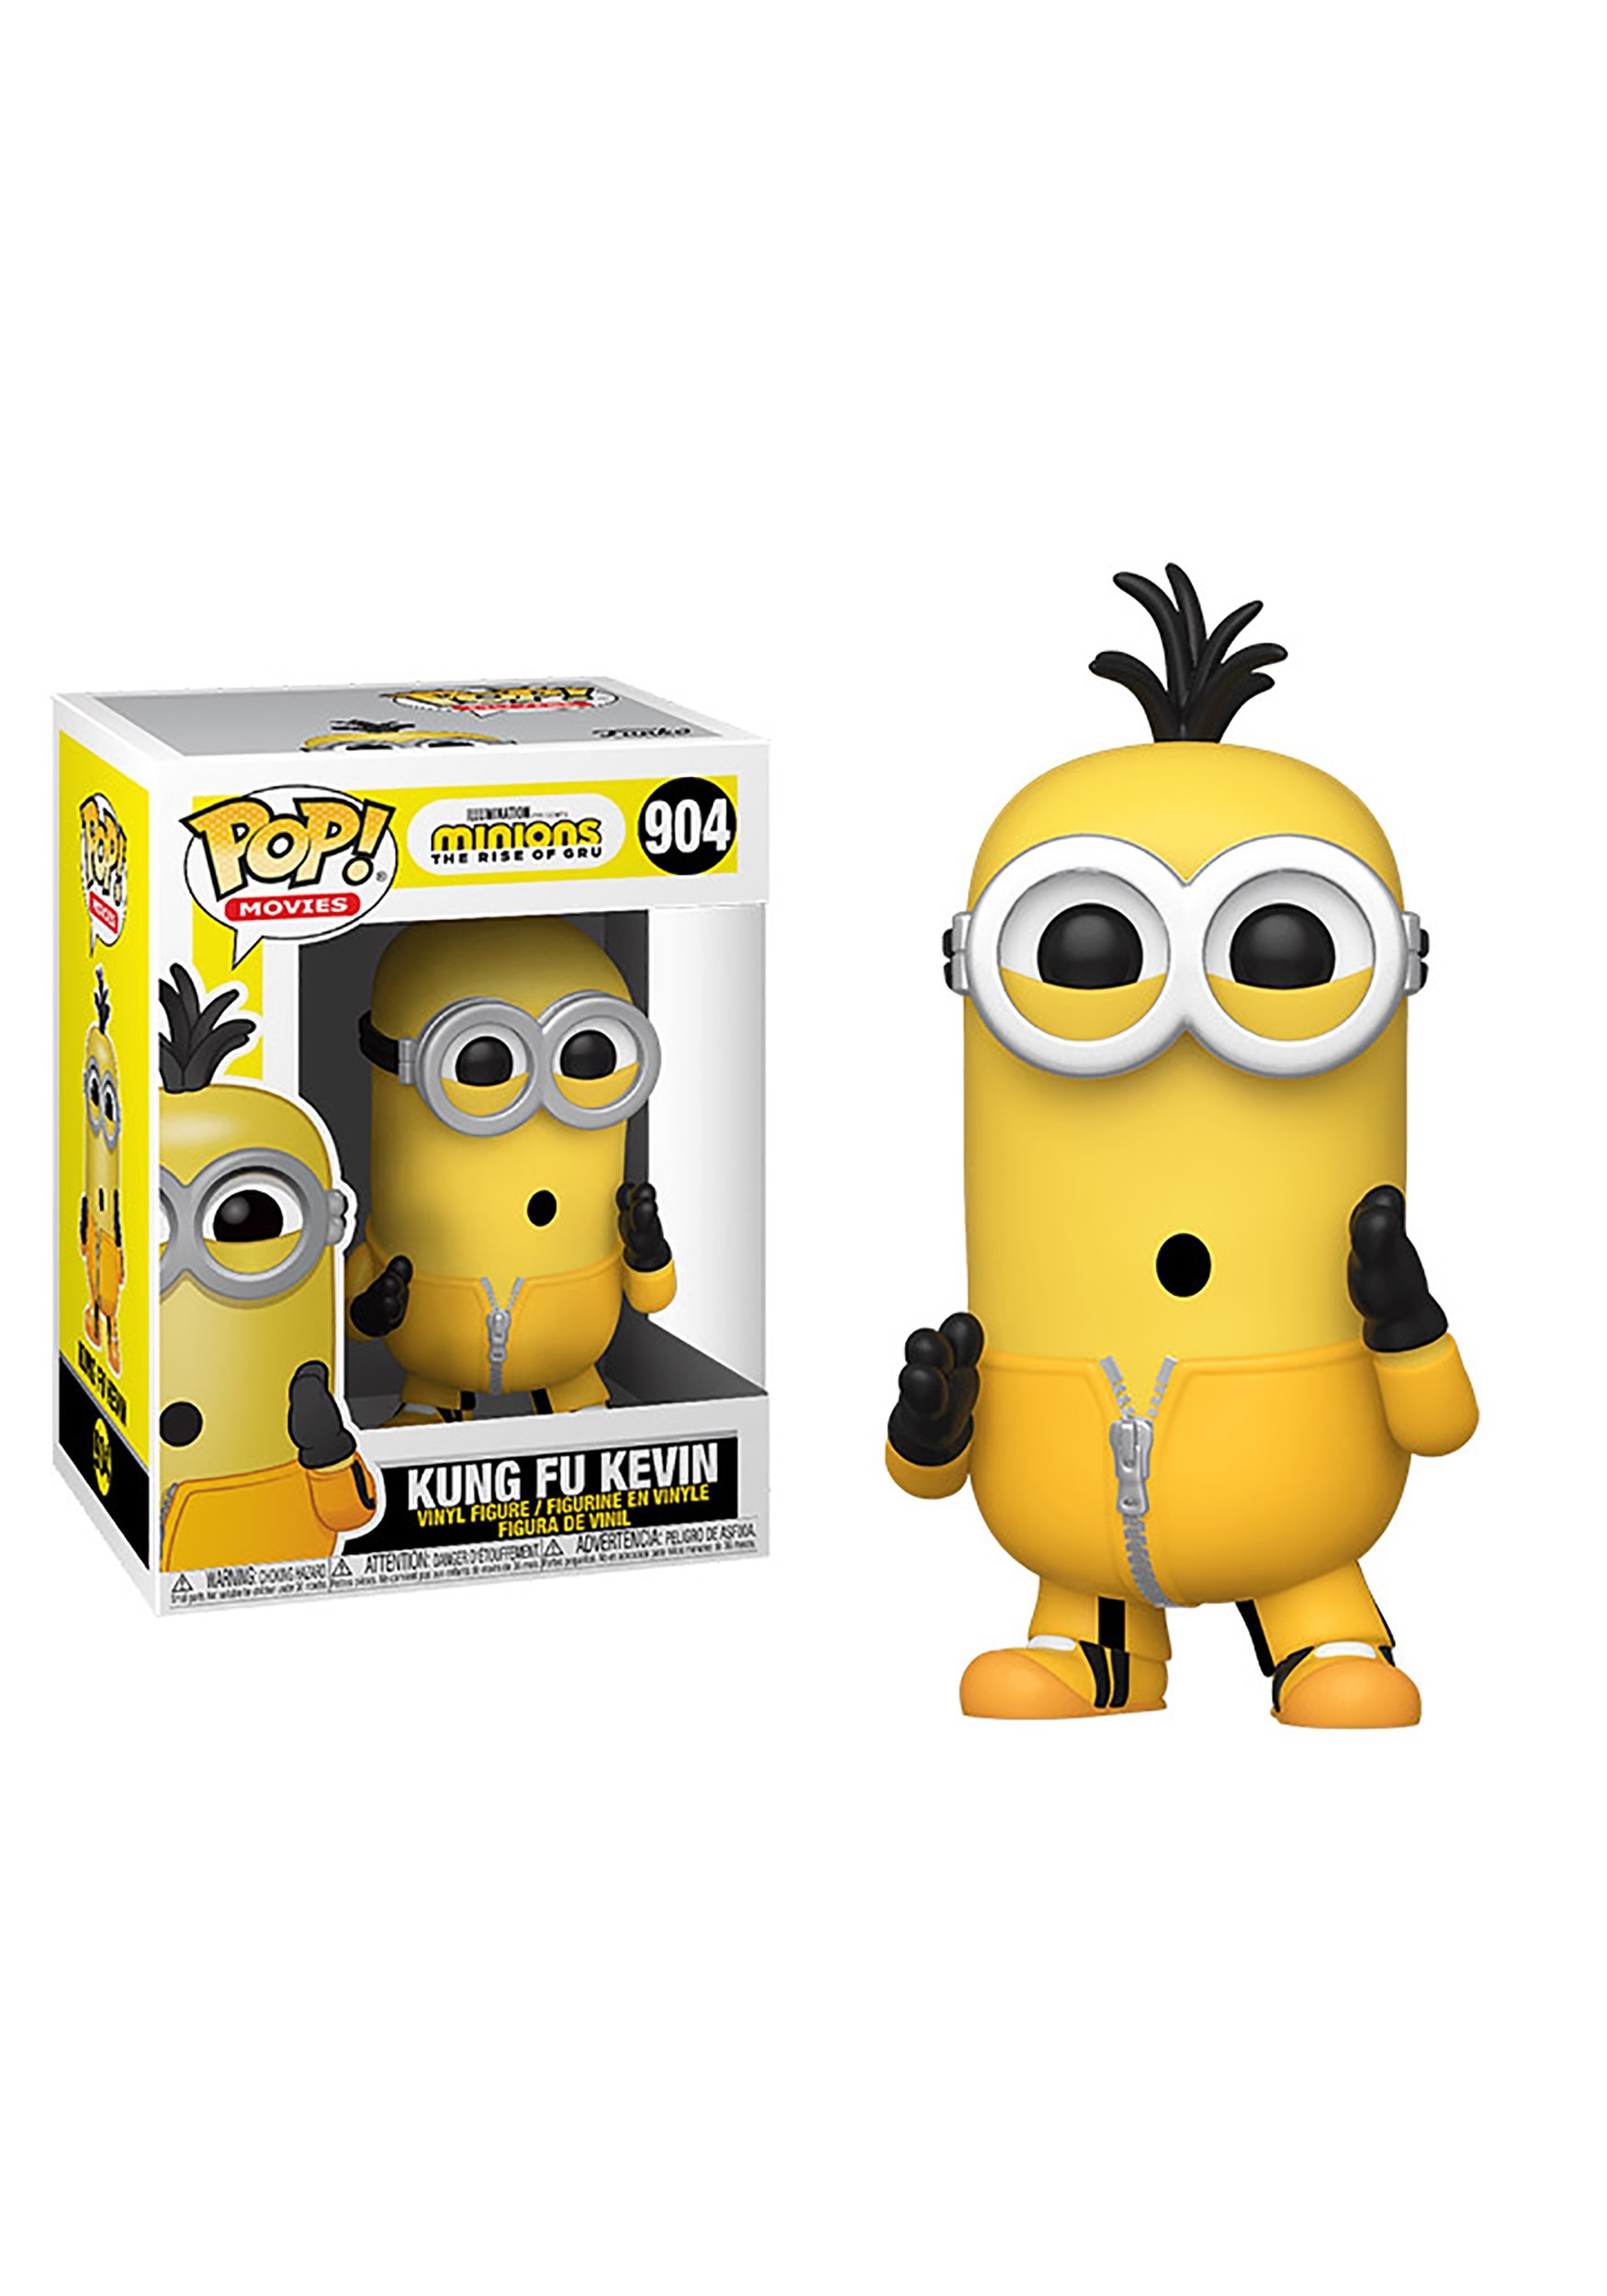 Kung Fu Kevin Minions The Rise Of Gru Funko Pop